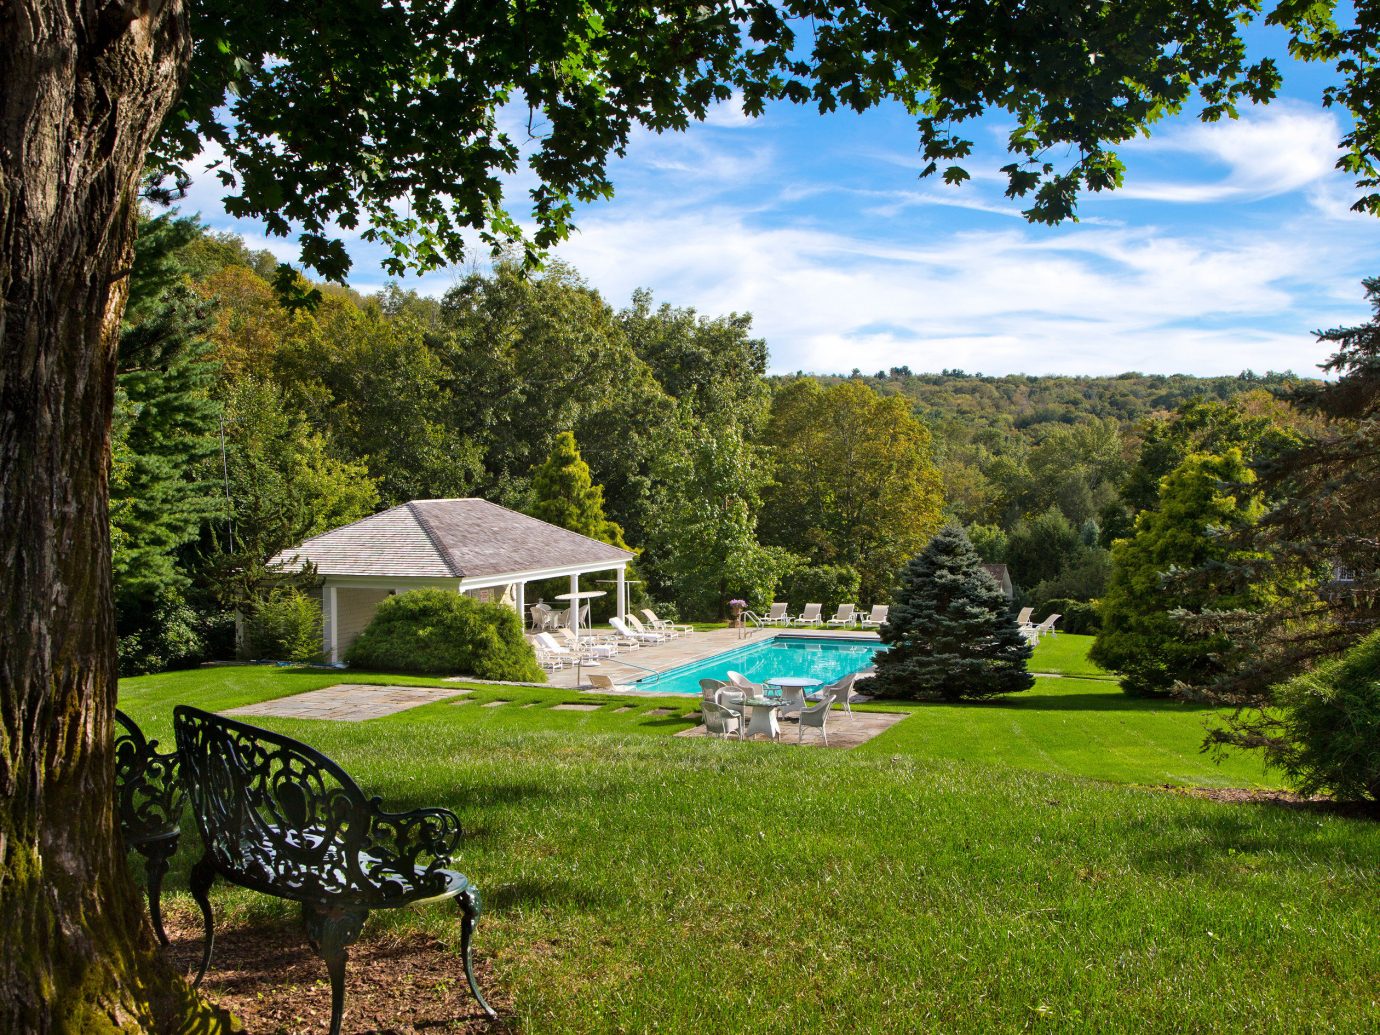 Country Pool Romance Scenic views Trip Ideas Weekend Getaways tree grass outdoor park Nature green woodland estate backyard Garden grassy outdoor recreation meadow Forest rural area lawn camping yard seat area lush shade